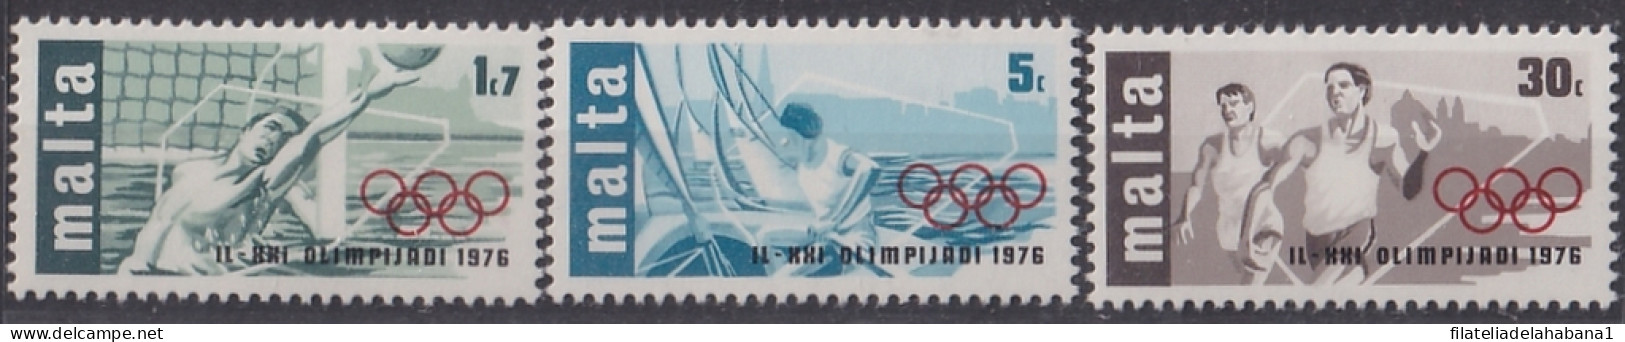 F-EX47597 MALTA MNH 1976 MONTREAL OLYMPIC GAMES ATHLETISM YACHTING WATERPOLO.  - Sommer 1976: Montreal